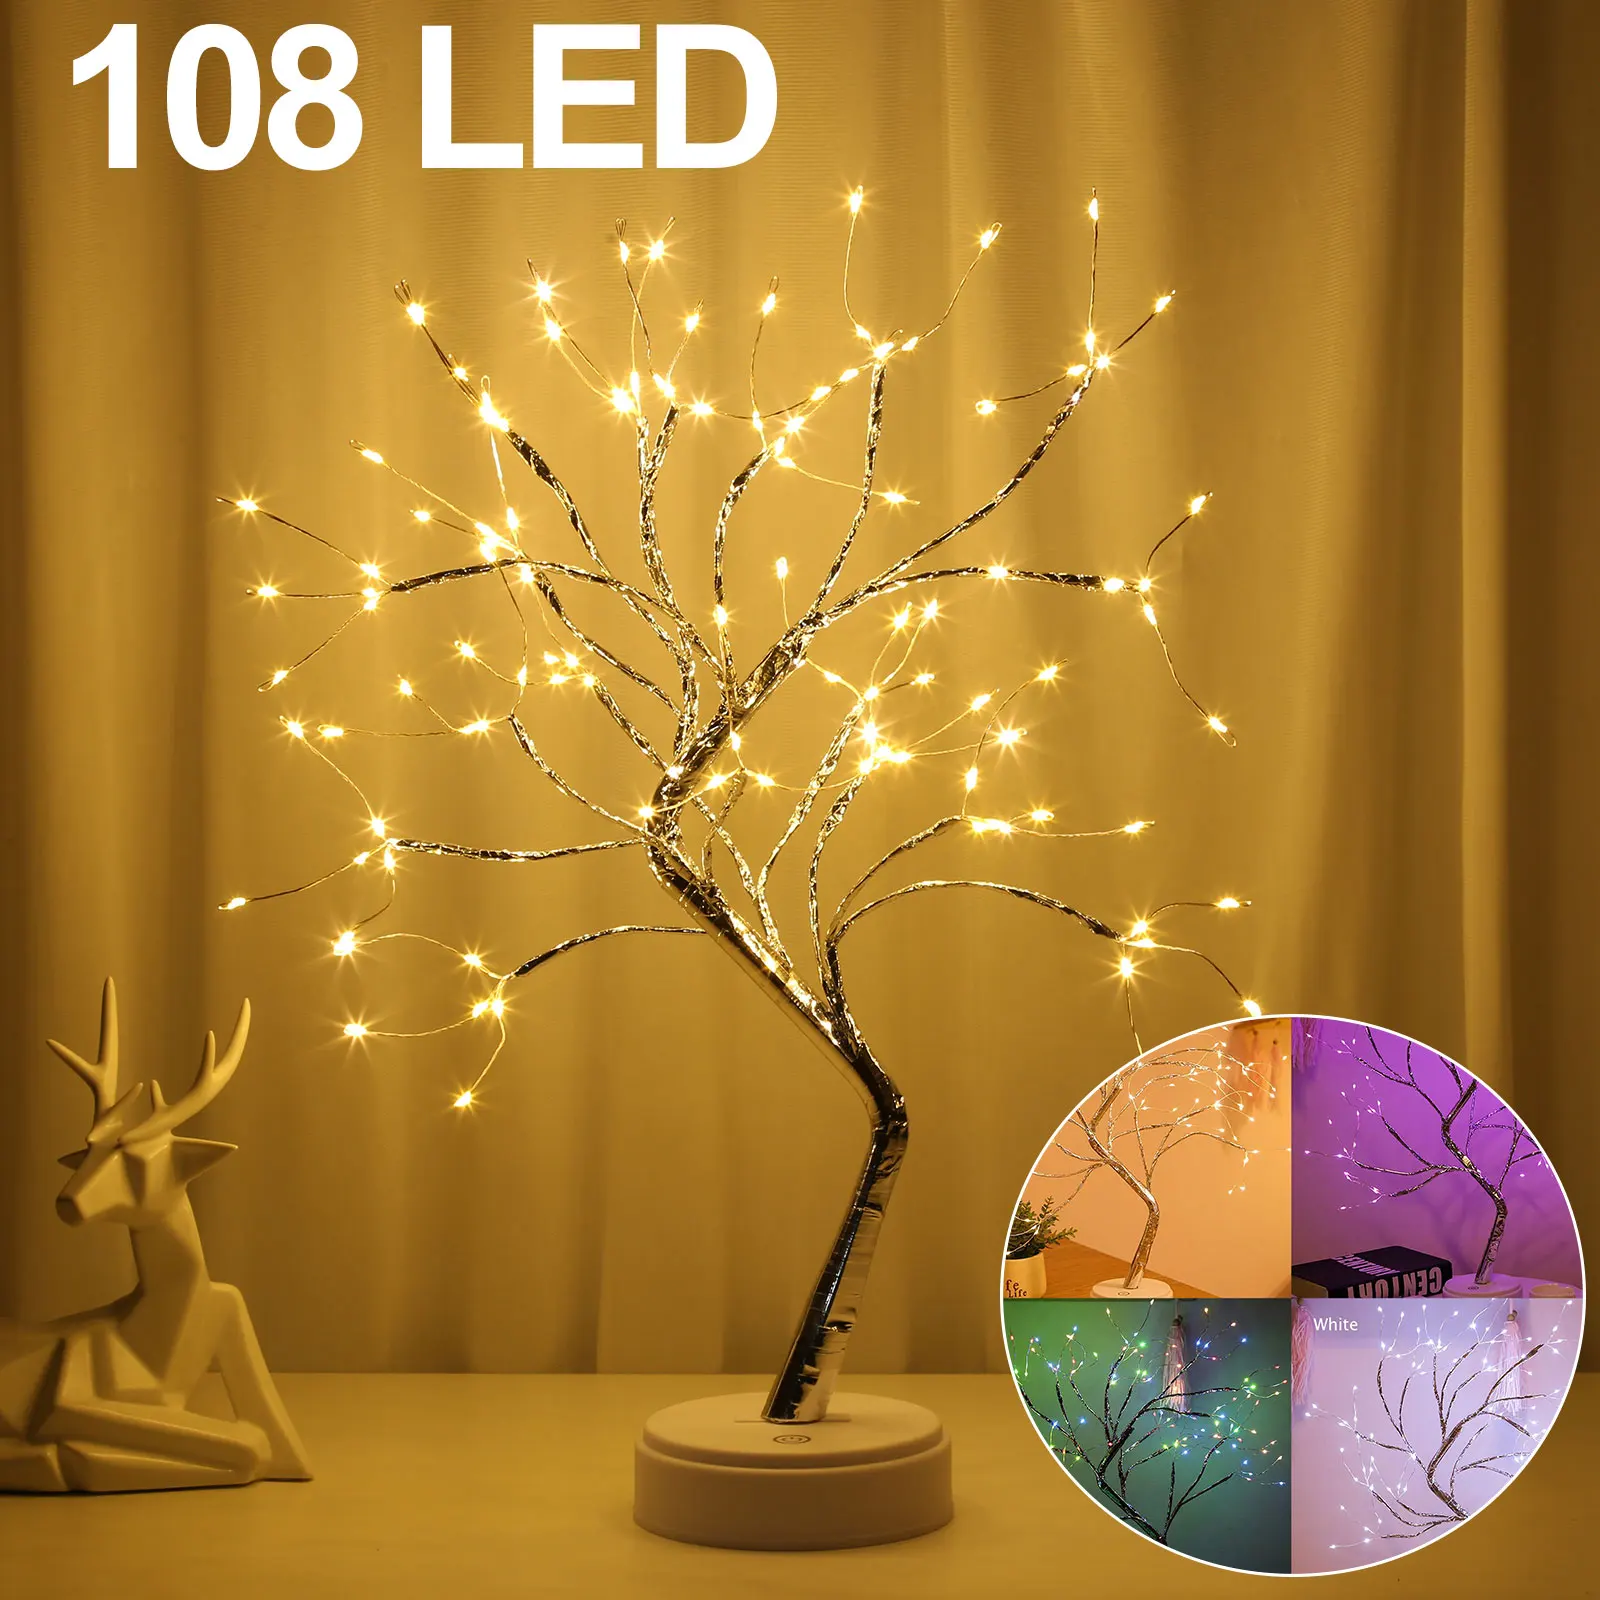 108 LED Night Light Tabletop Bonsai Tree Light Lamp Touch Switch Copper ... - $21.10+